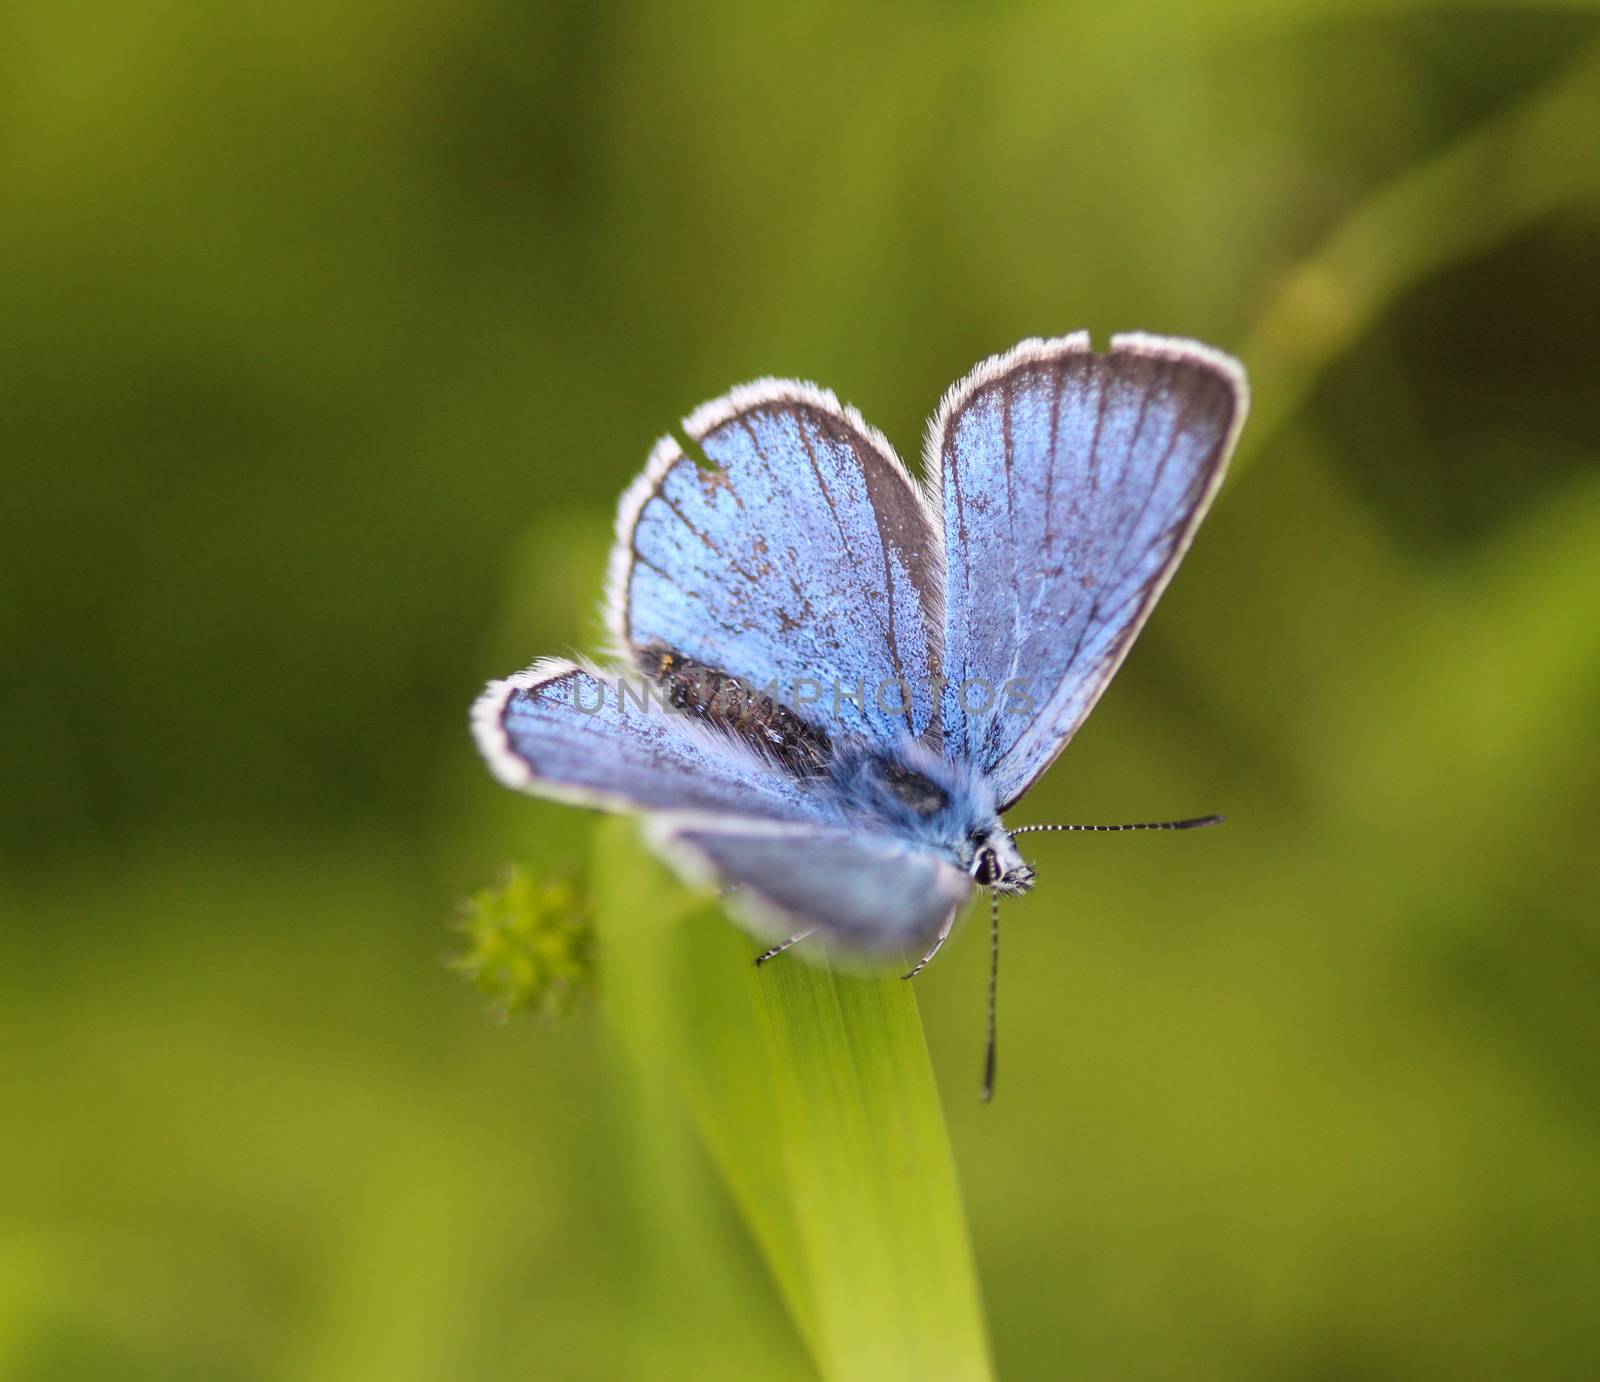 Polyommatus dorylas, the turquoise blue butterfly of the family Lycaenidae by michaelmeijer